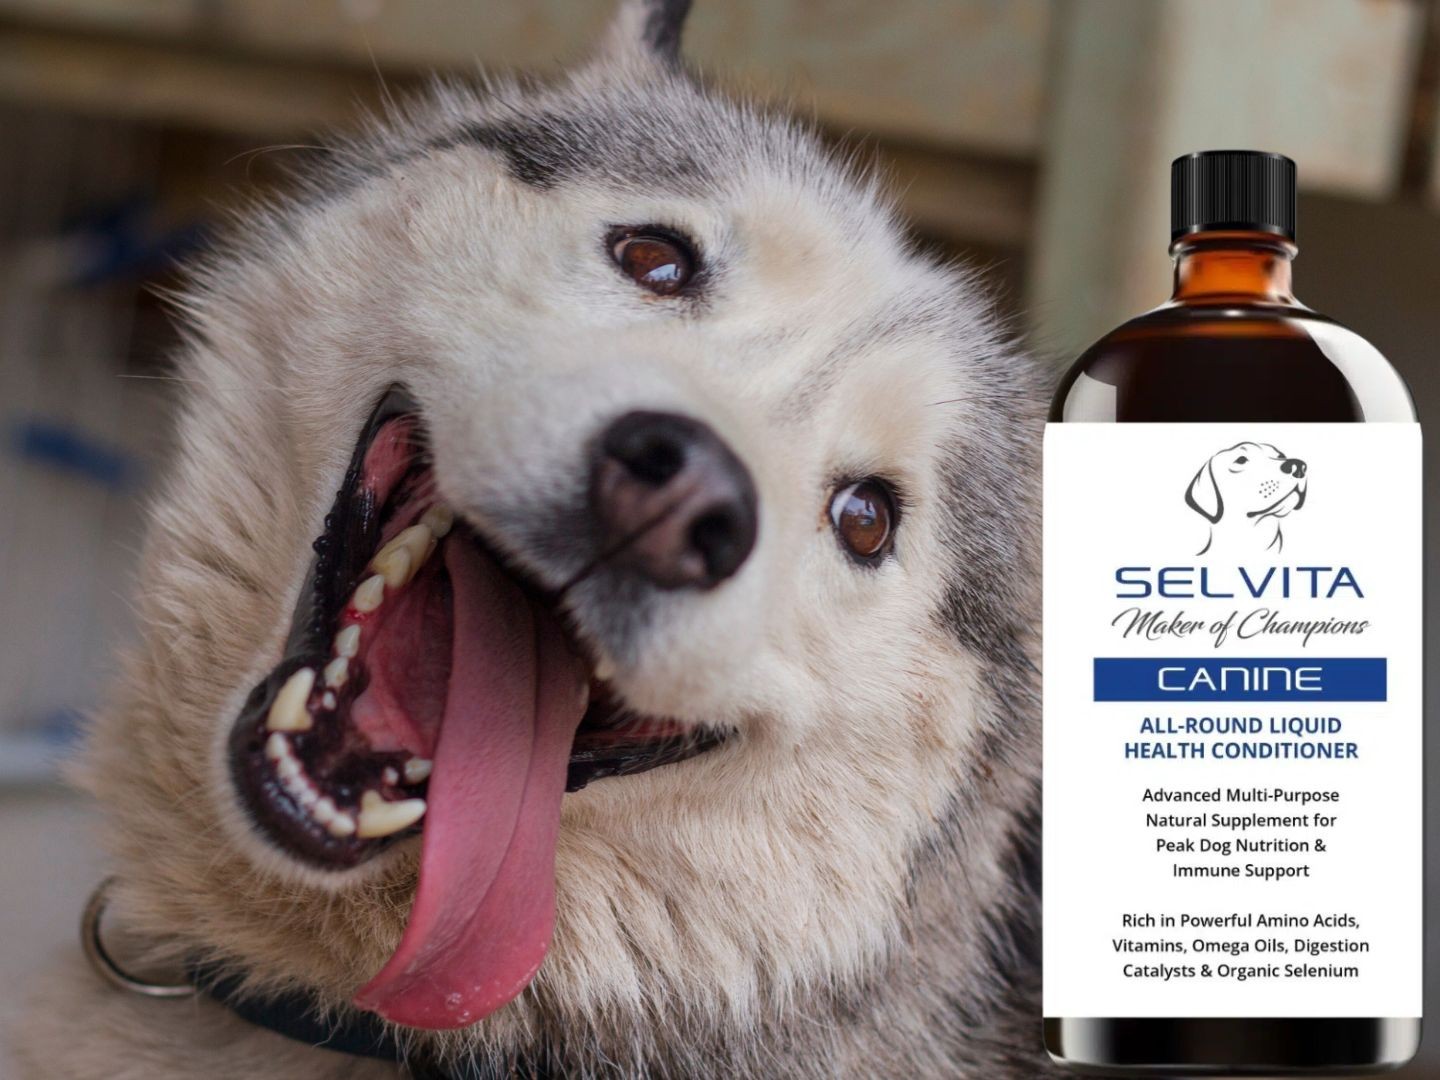 Selvita Canine Happy Dog with Product image